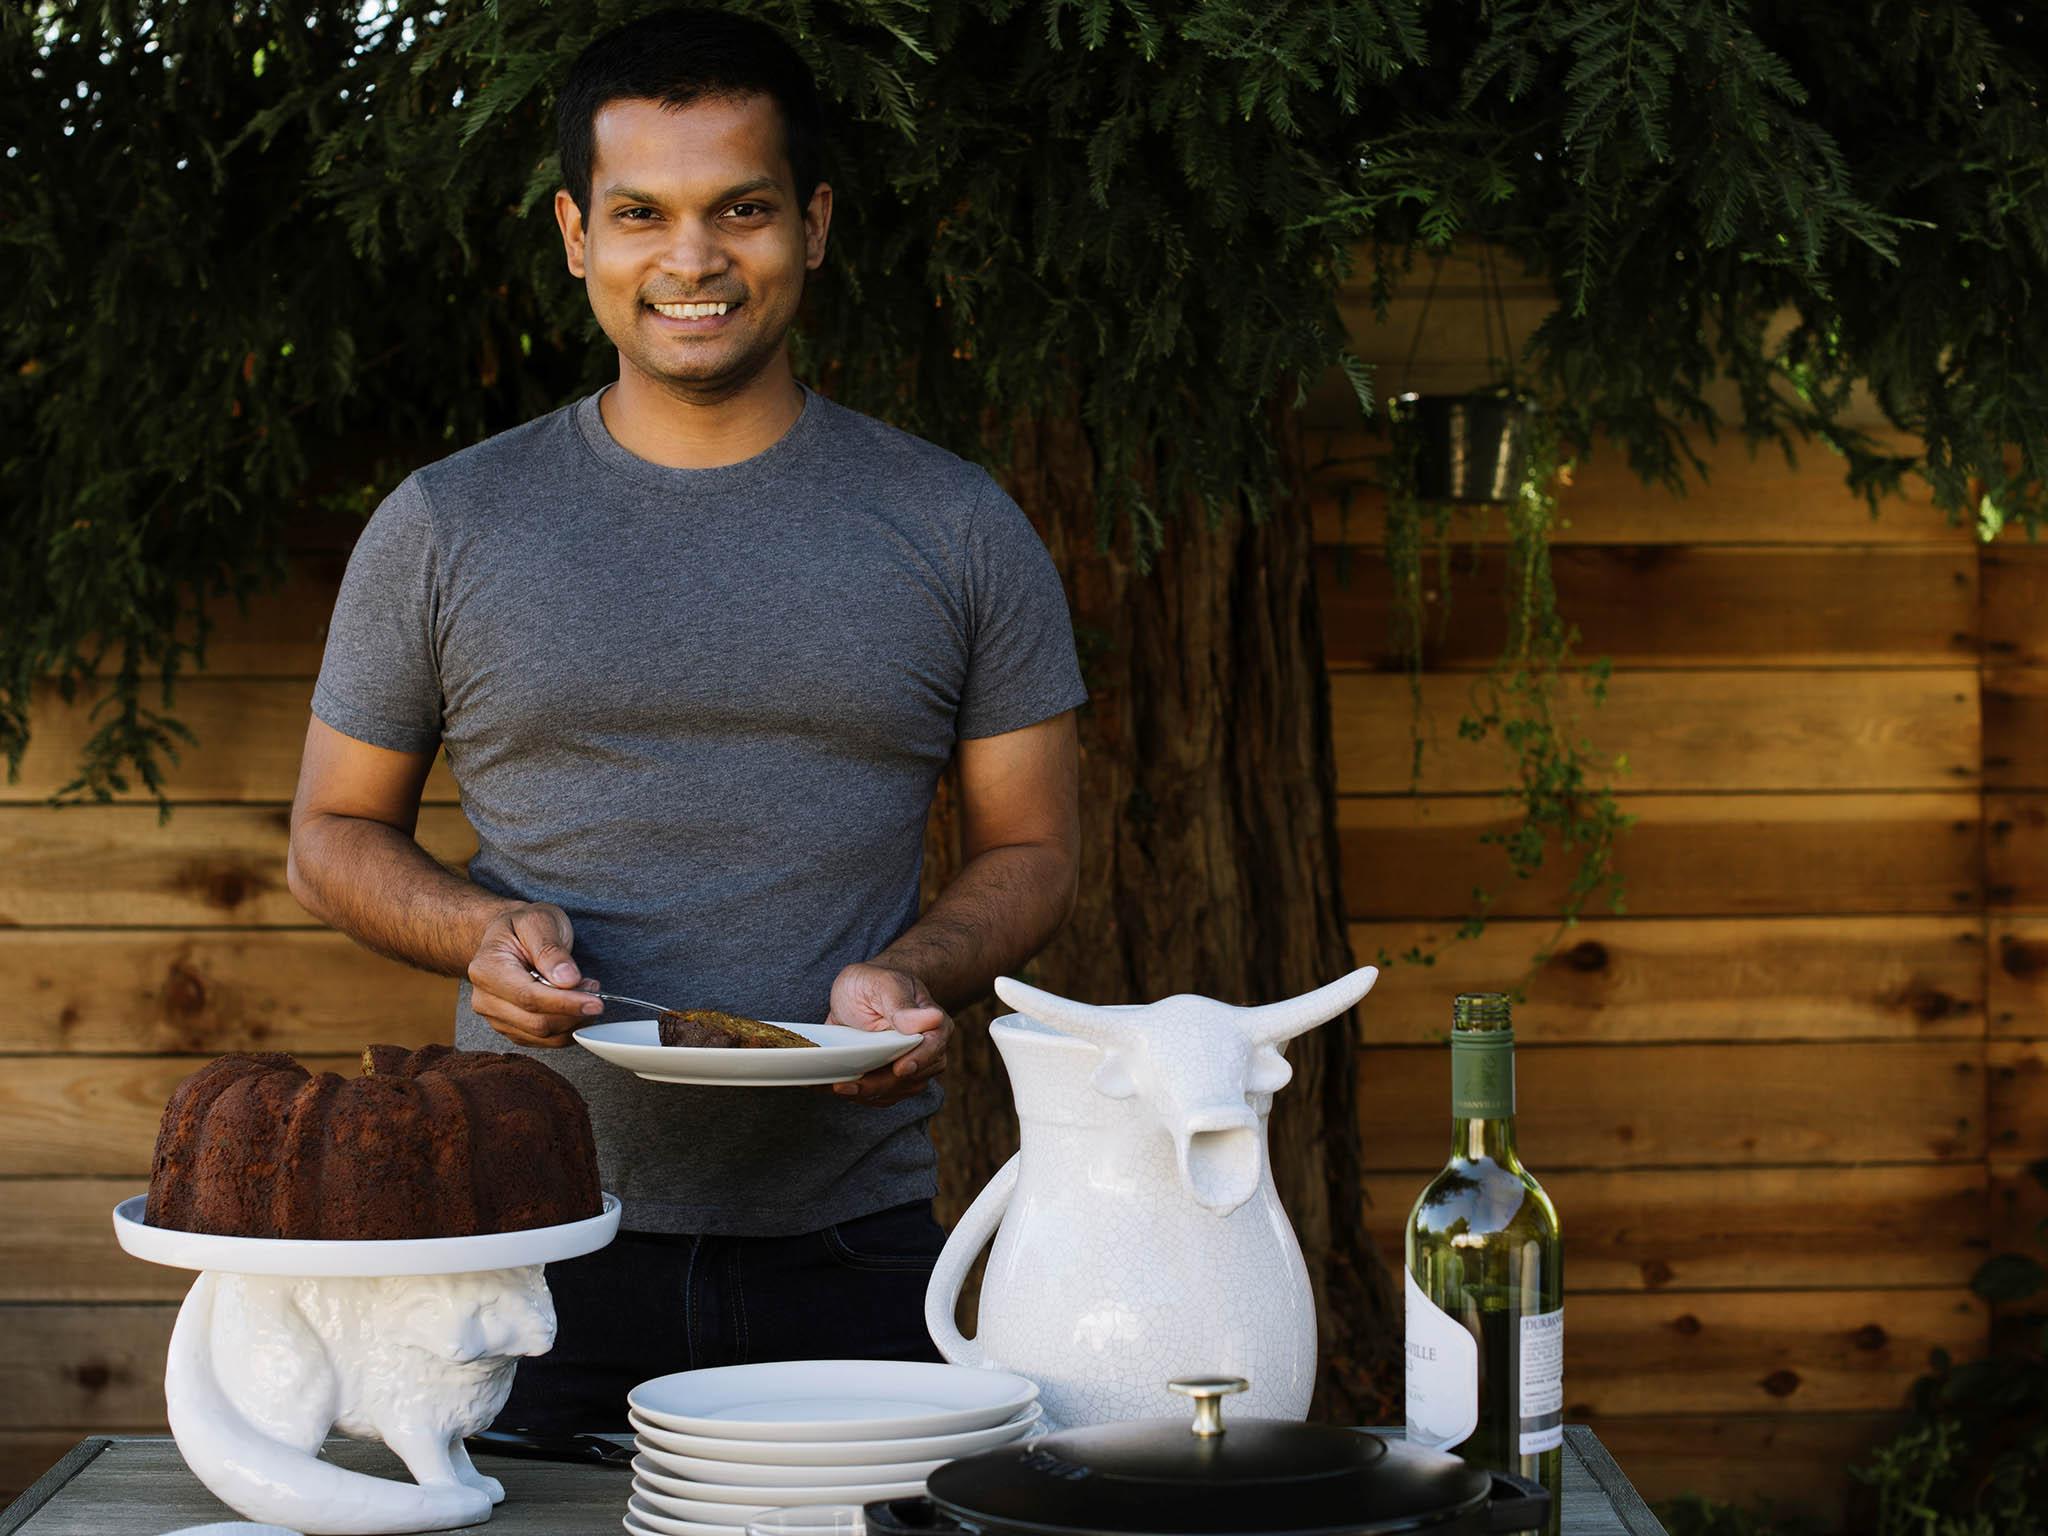 How Nik Sharma his career a scientist into a successful chef | The Independent | The Independent